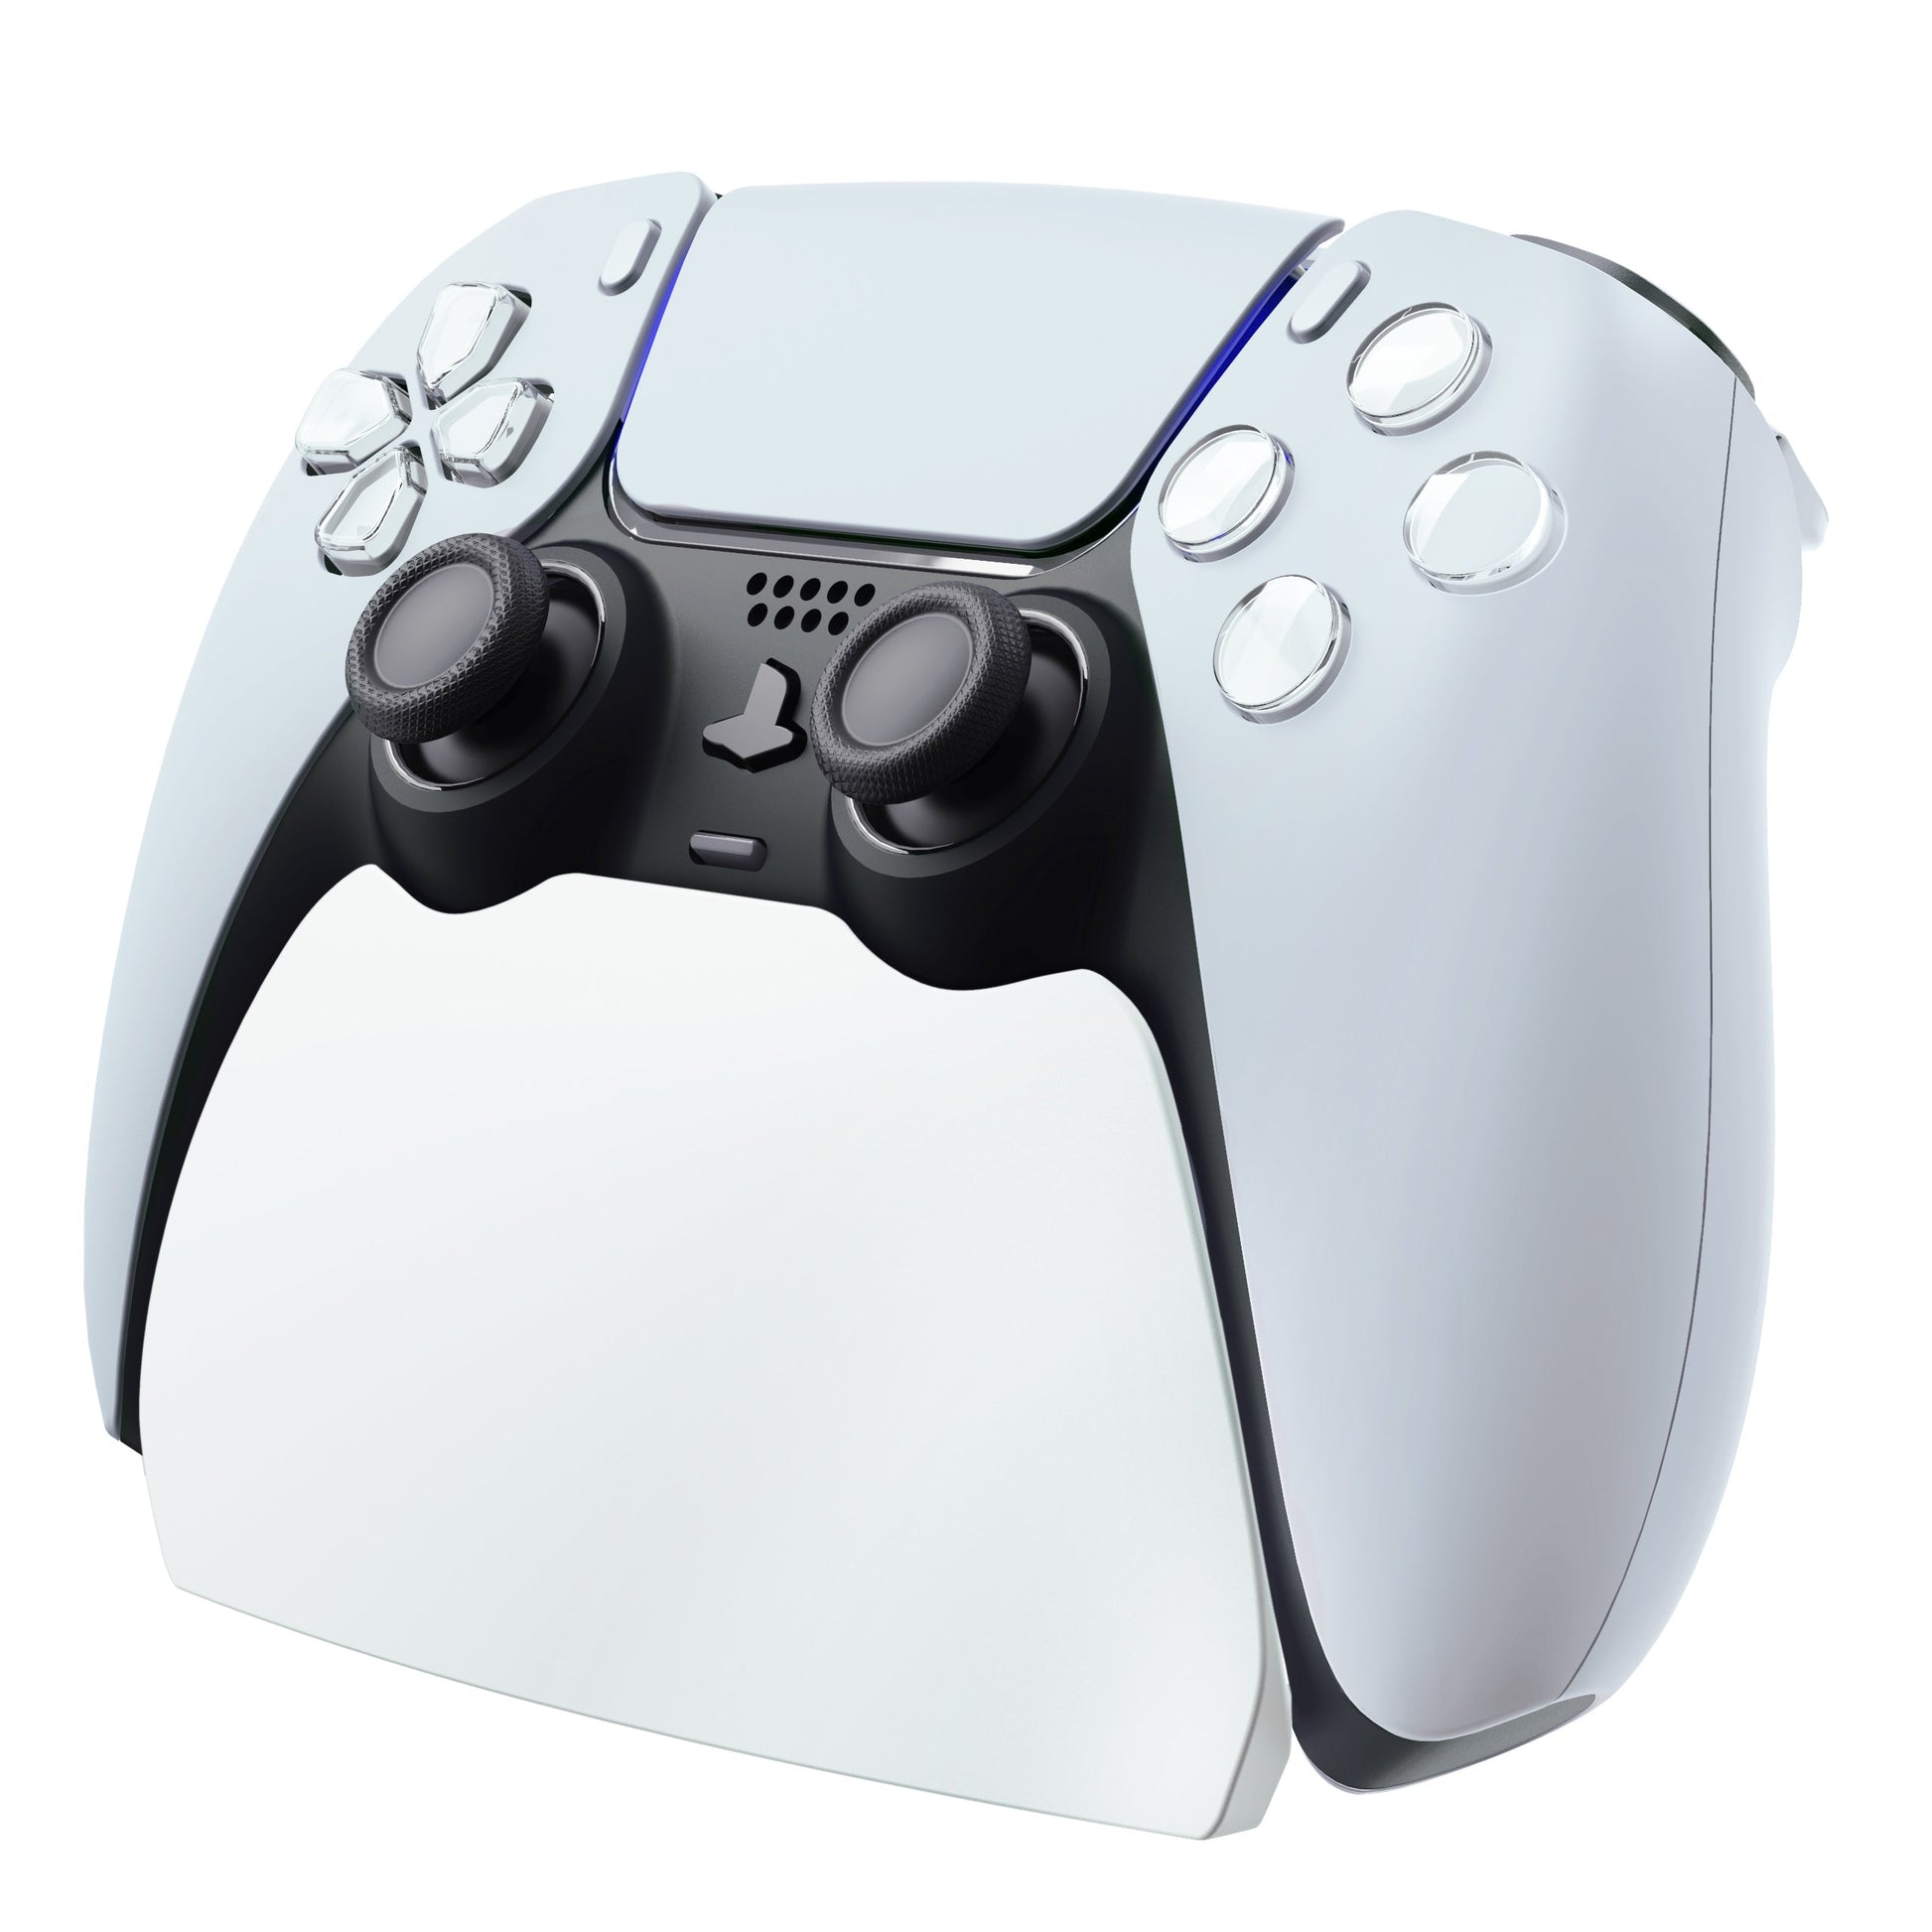 PlayVital Solid White Controller Display Stand for PlayStation 5, Gamepad Accessories Desk Holder for PS5 Controller with Rubber Pads - PFPJ004 PlayVital